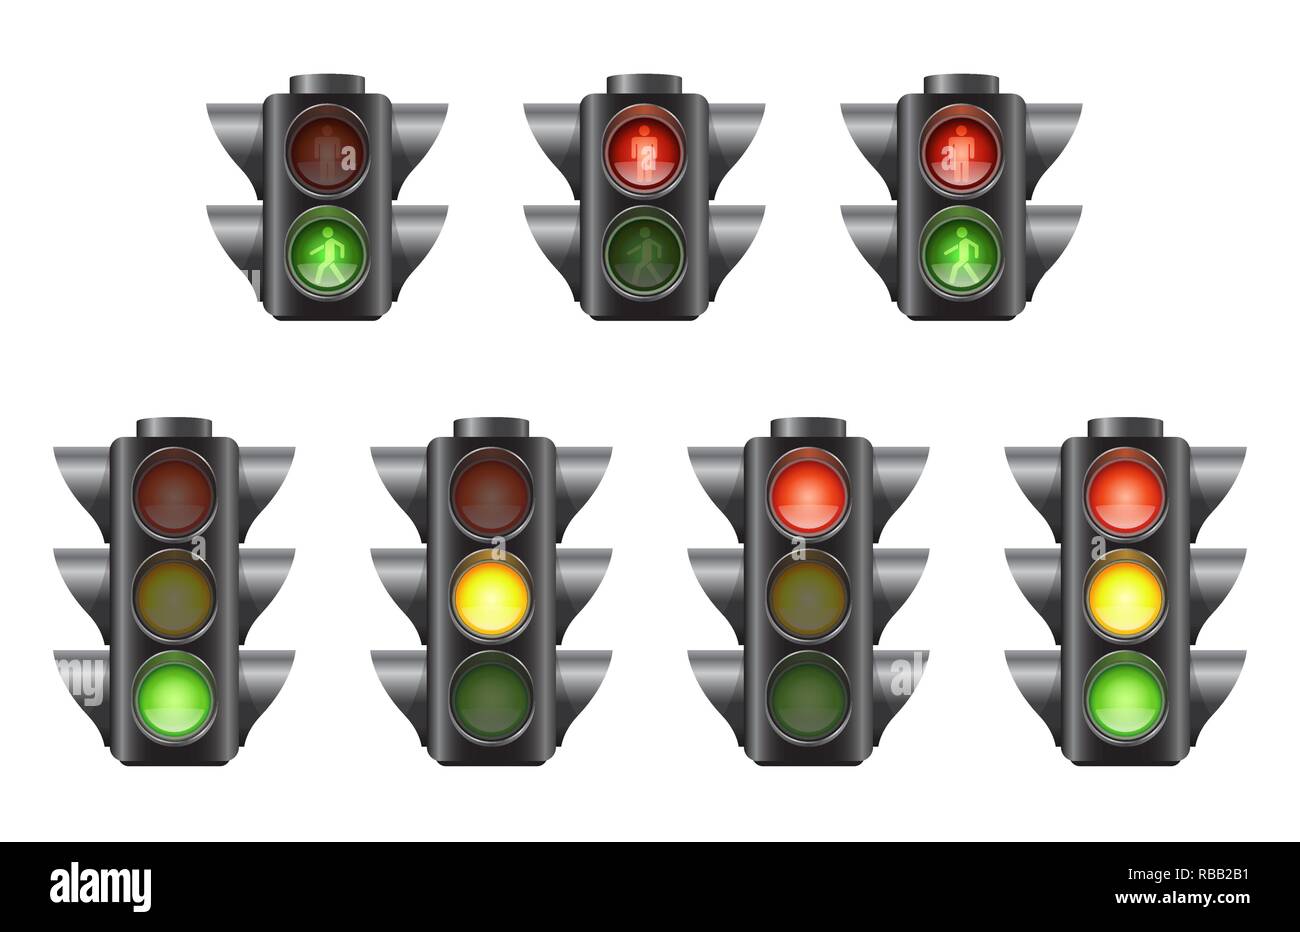 Set of realistic traffic lights for cars and pedestrians Stock Vector